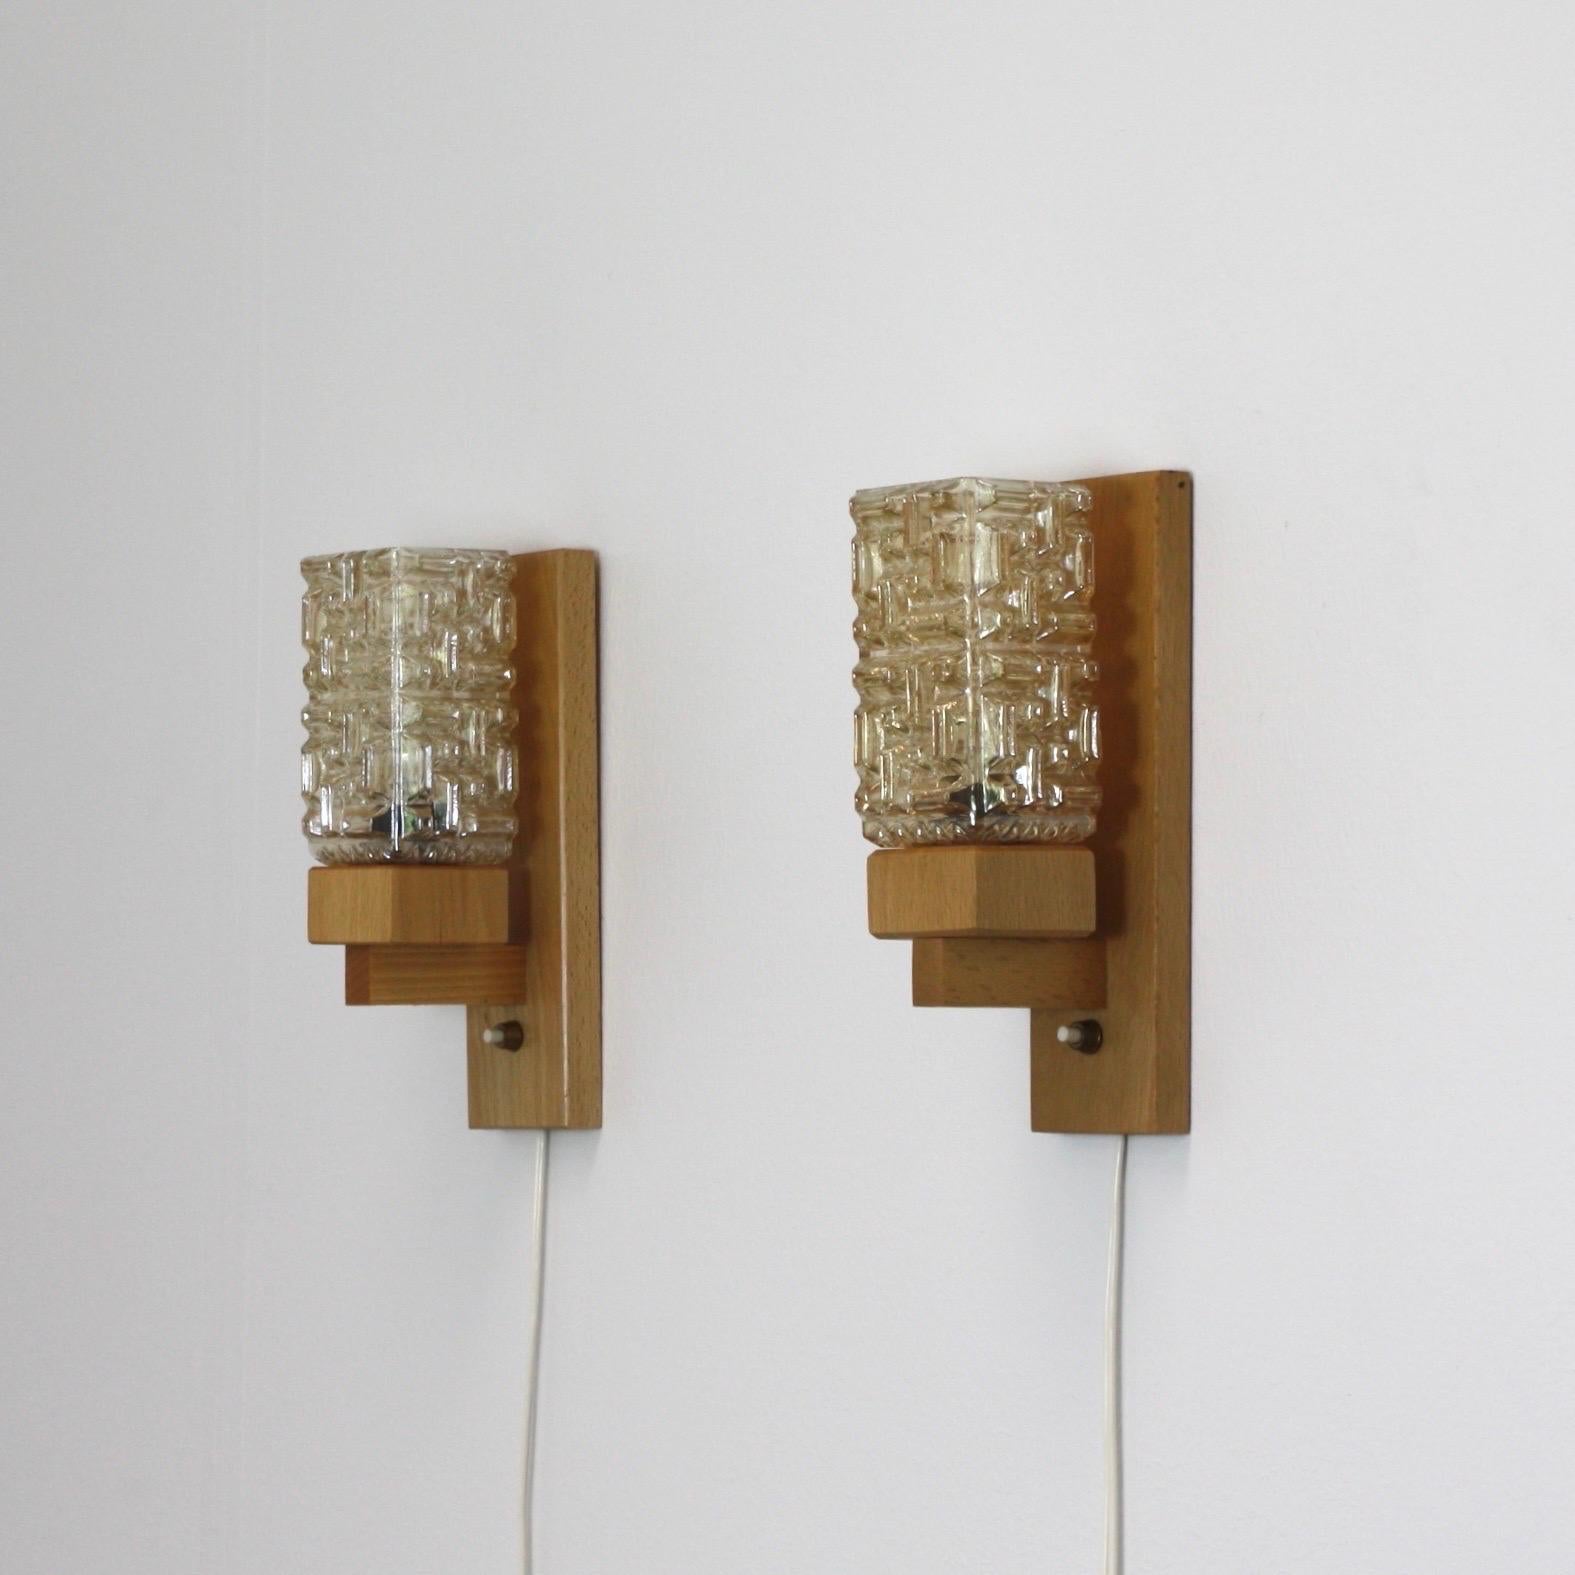 Set of 'Vitrika' Wall Lamps in Beech wood & Amber Glass, Denmark, 1970s In Good Condition For Sale In Værløse, DK